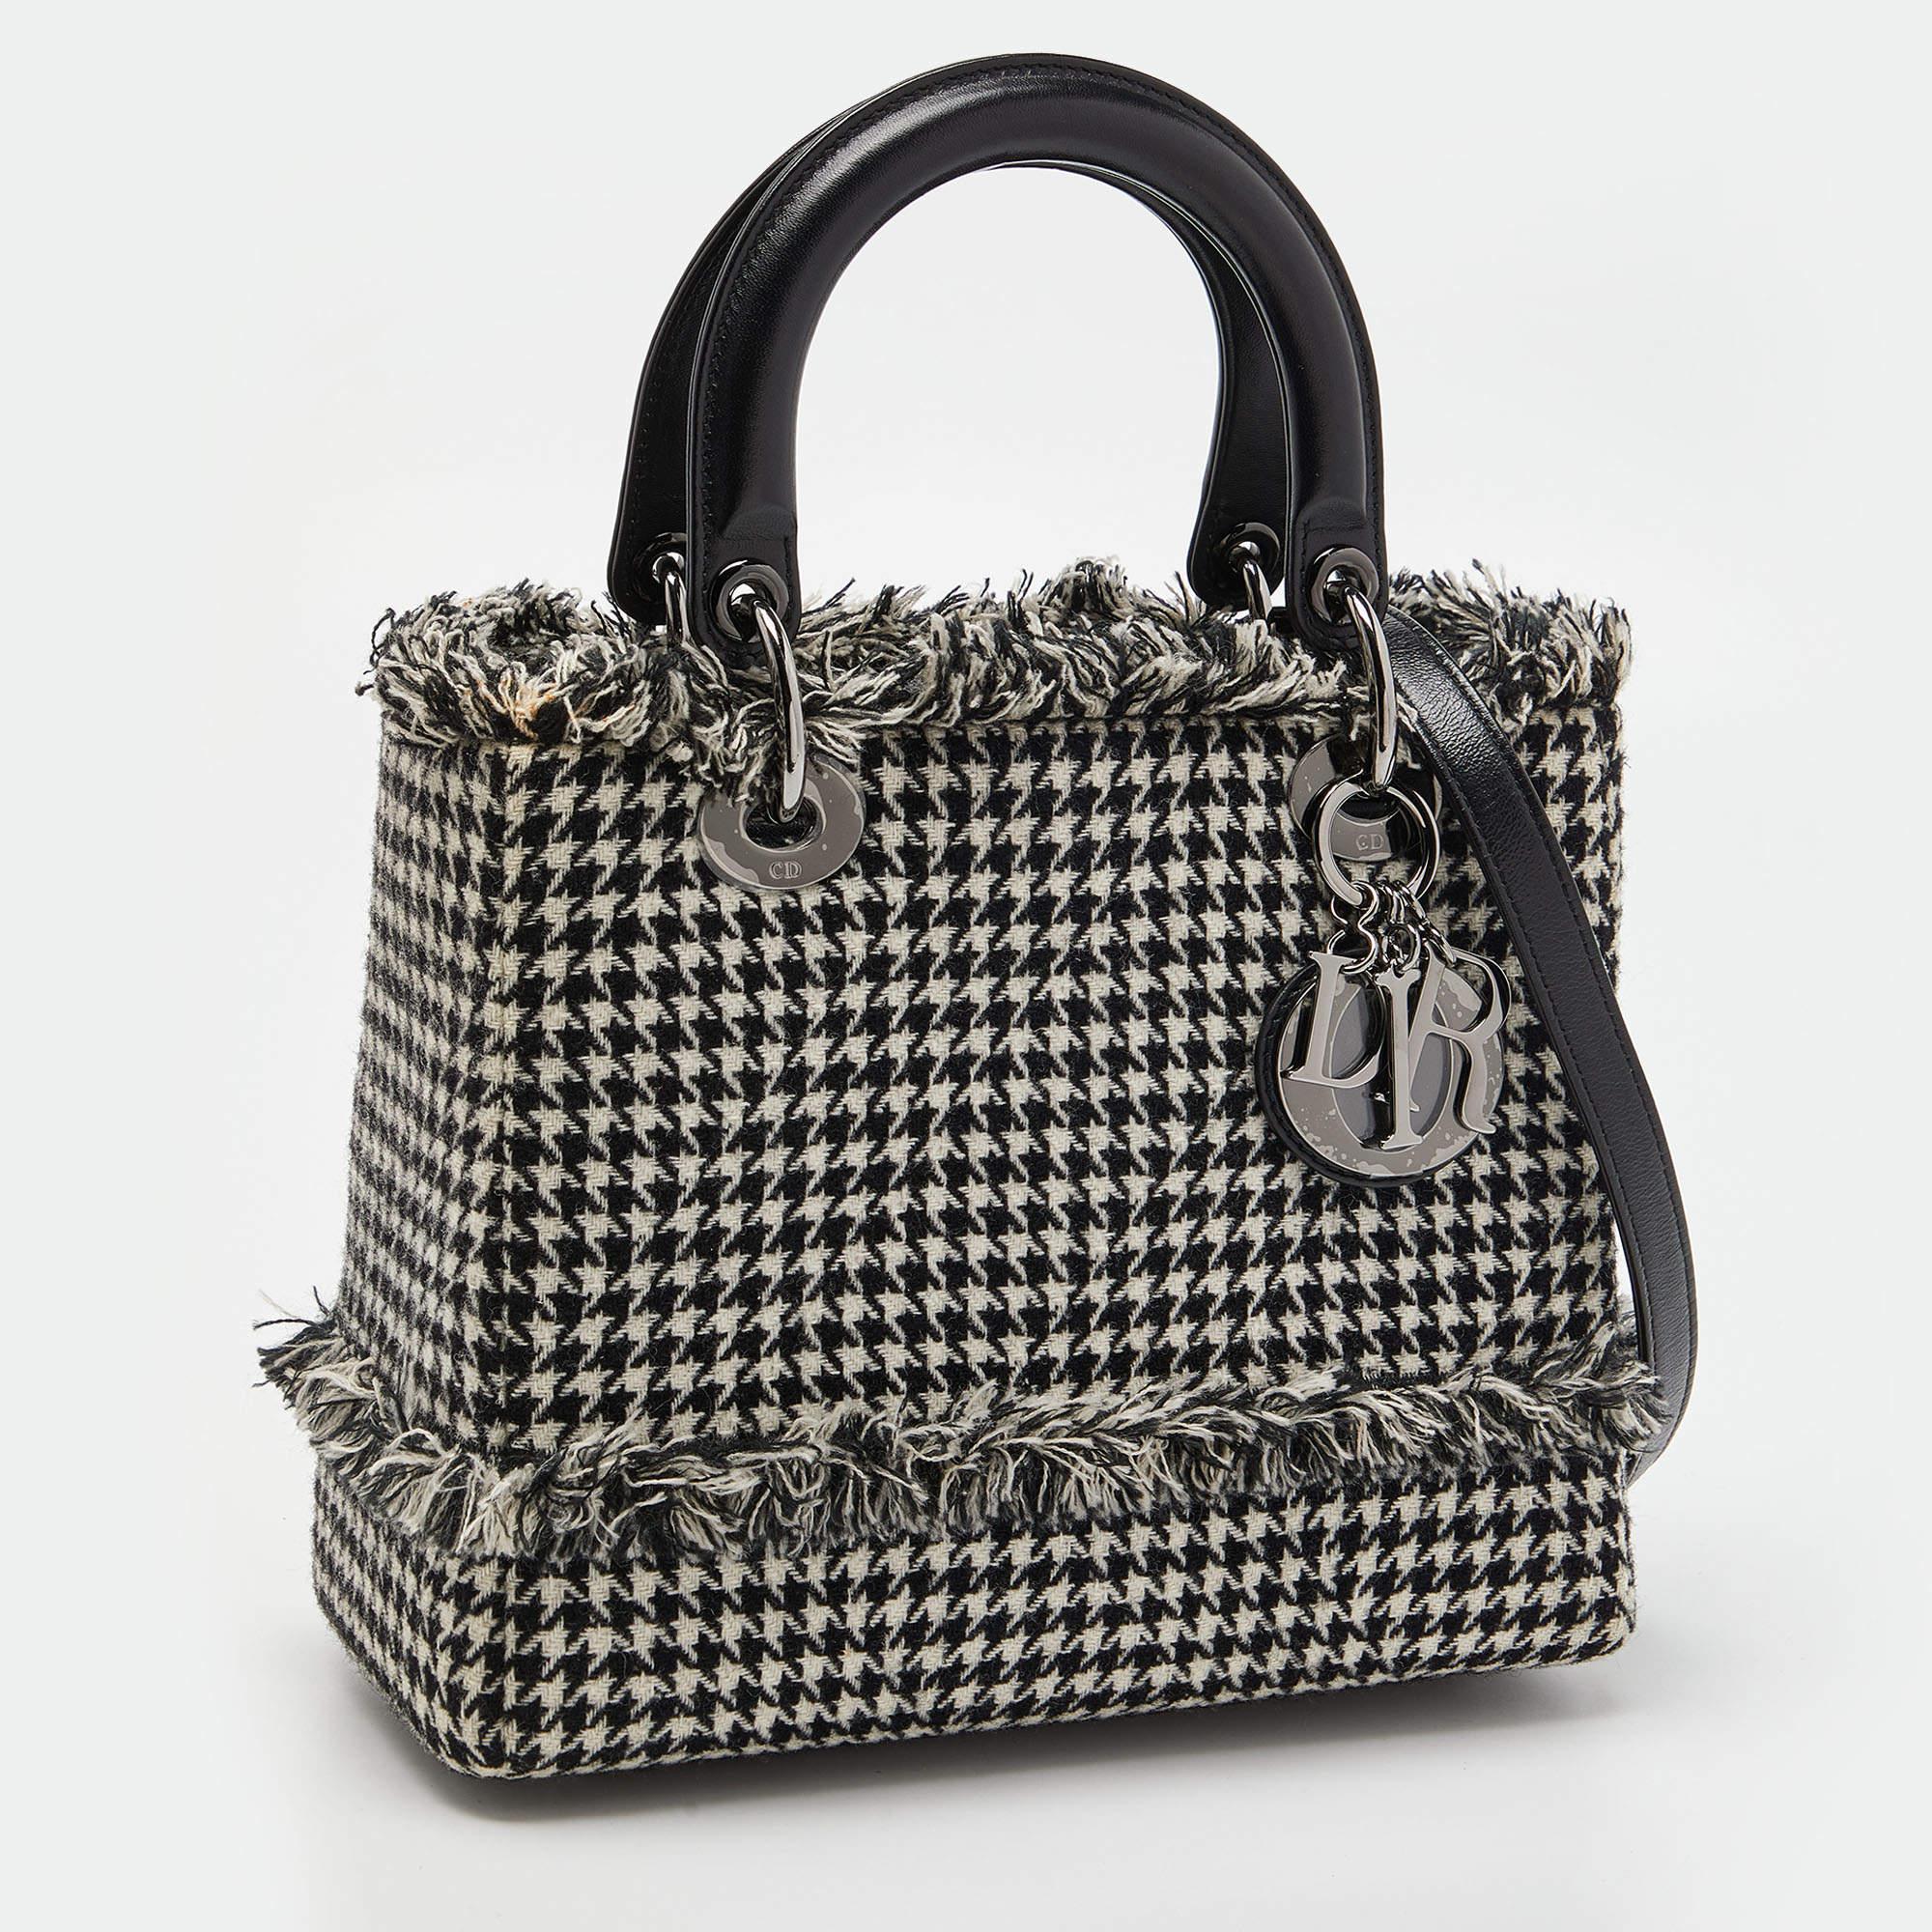 The Lady Dior tote is a creation that has gained recognition worldwide, continuing a legacy of being a coveted bag. This black & white tote has been crafted from tweed fabric and it carries a houndstooth pattern. It is equipped with a leather